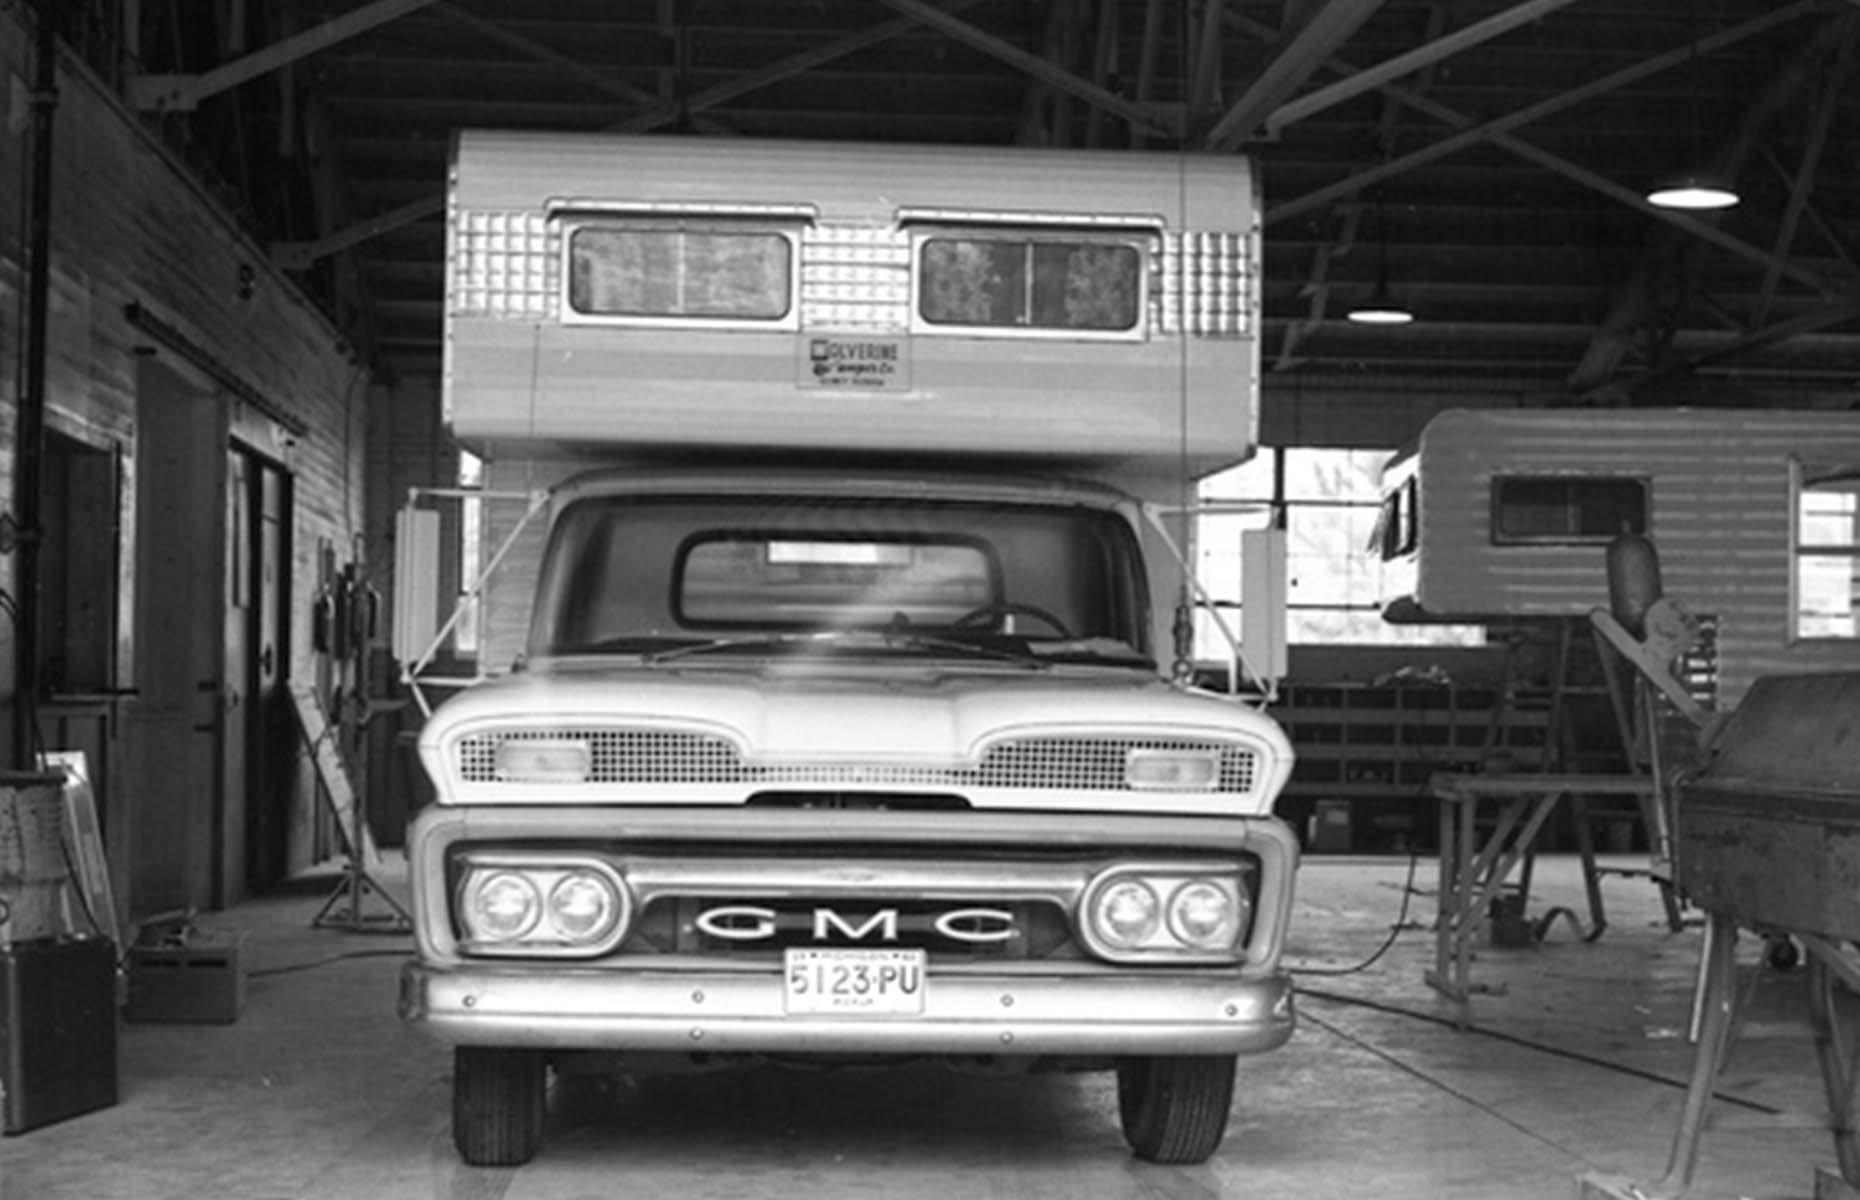 In this decade, RVs were beginning to take their modern shape: large, powerful vehicles crammed full of storage space and countertops, with comfy(ish) beds and a fully functioning kitchen to boot. The Wolverine Camper Co. was another notable player: this smart motorhome is pictured at the Wolverine factory in Quincy, Florida in 1961.